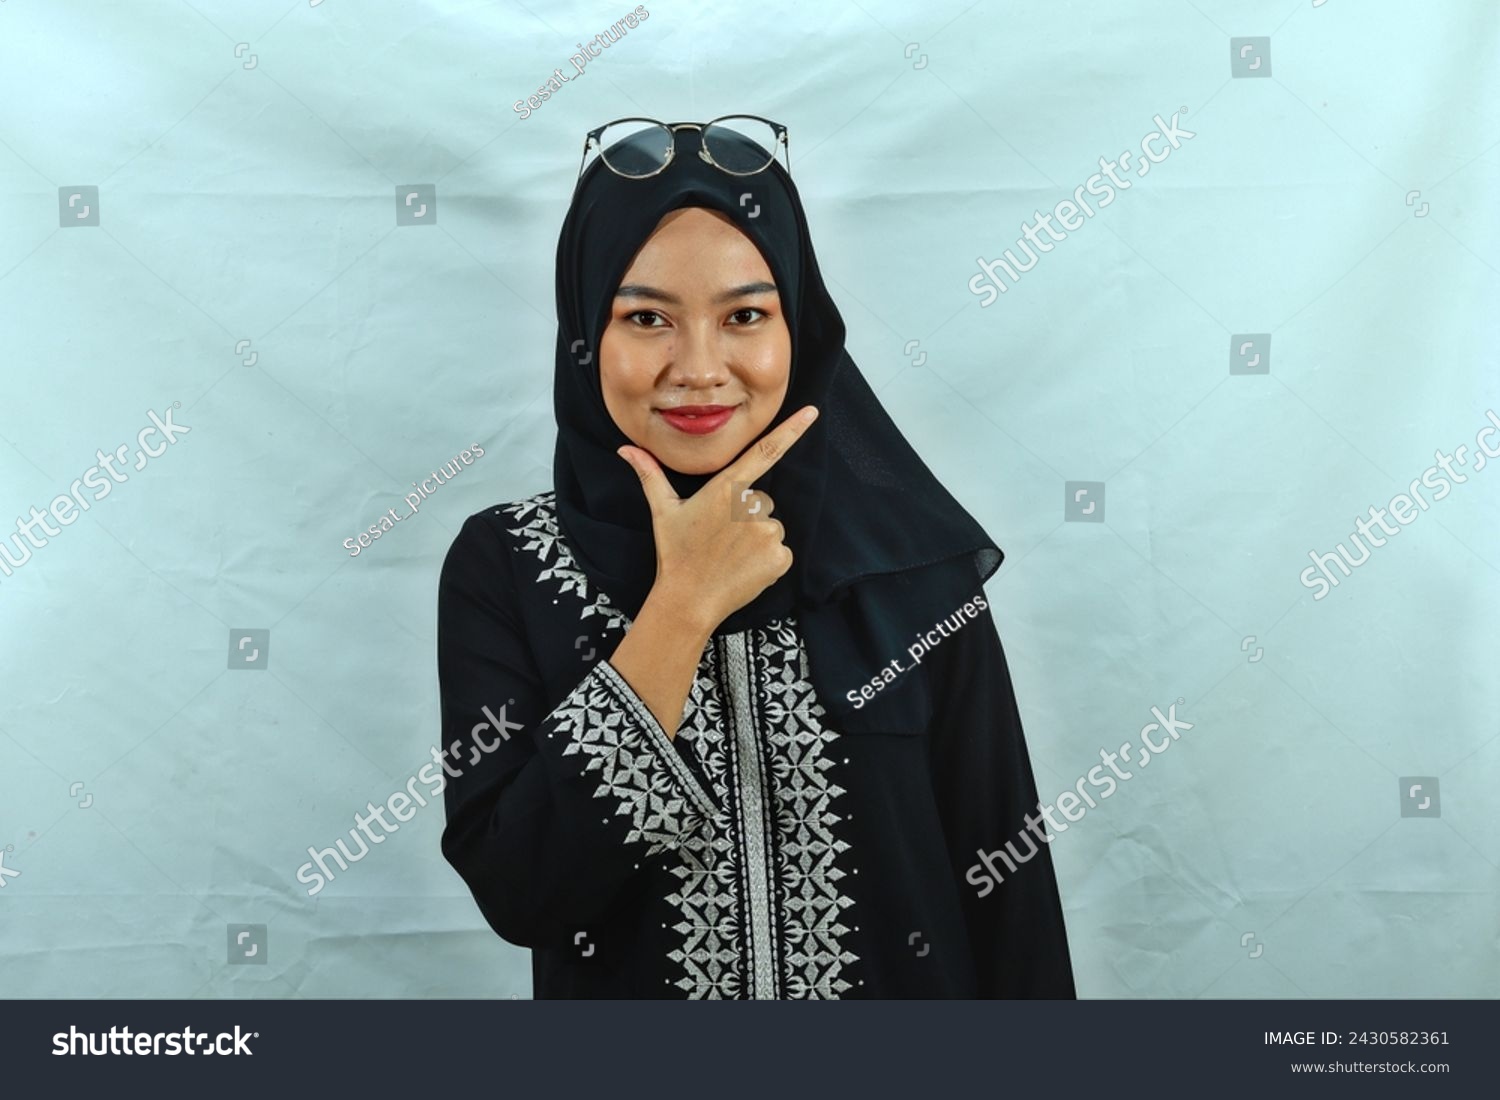 Asian Muslim woman wearing hijab, glasses and black dress with white pattern making chis gesture with a satisfied expression isolated on white background #2430582361